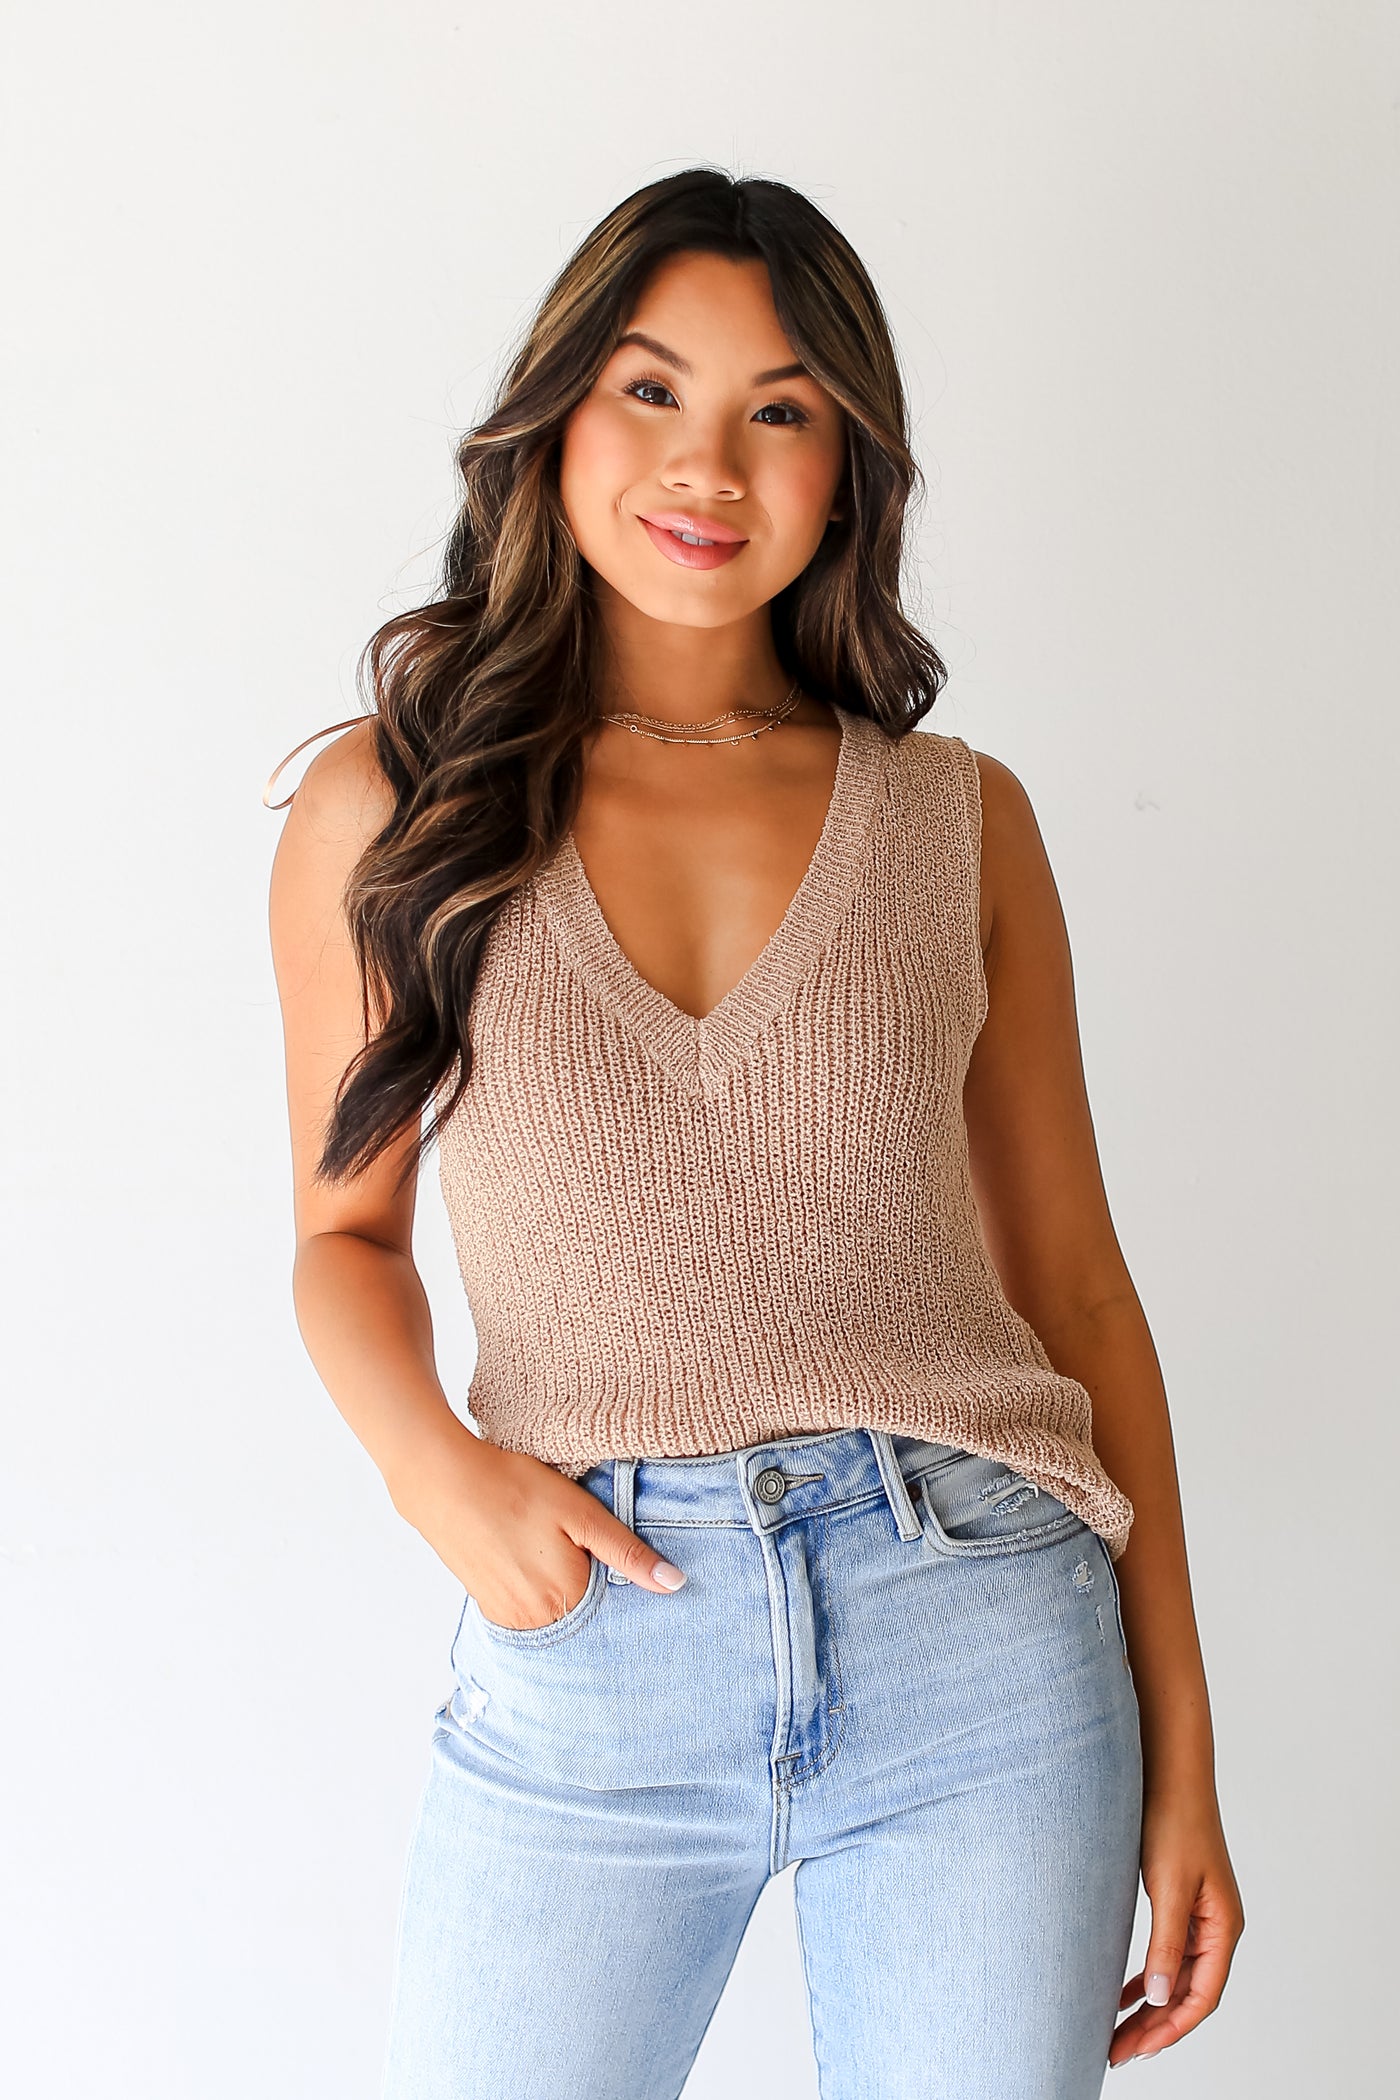 taupe Knit Tank back view